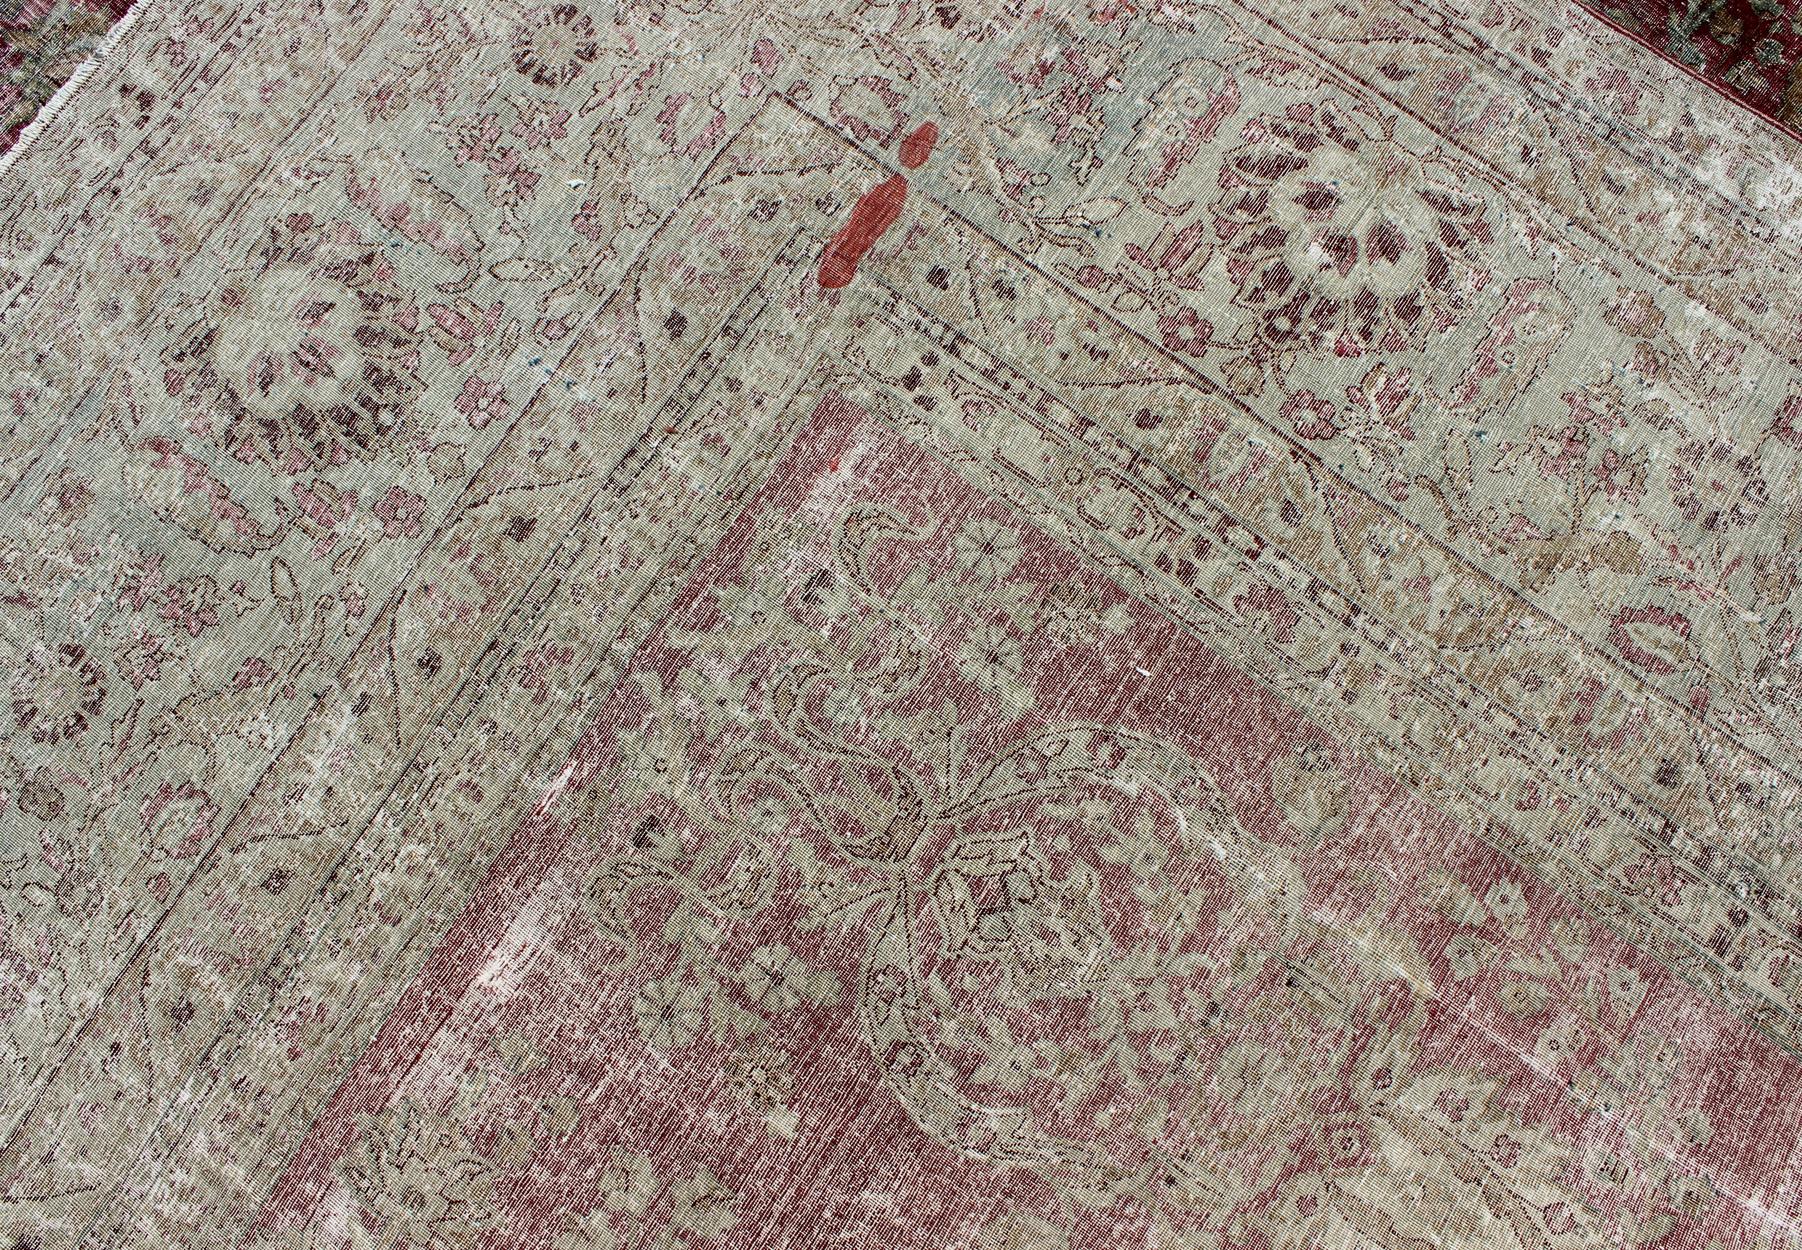 Distressed Antique Persian Lavar Kerman Rug in All-Over Intricate Floral Design For Sale 9